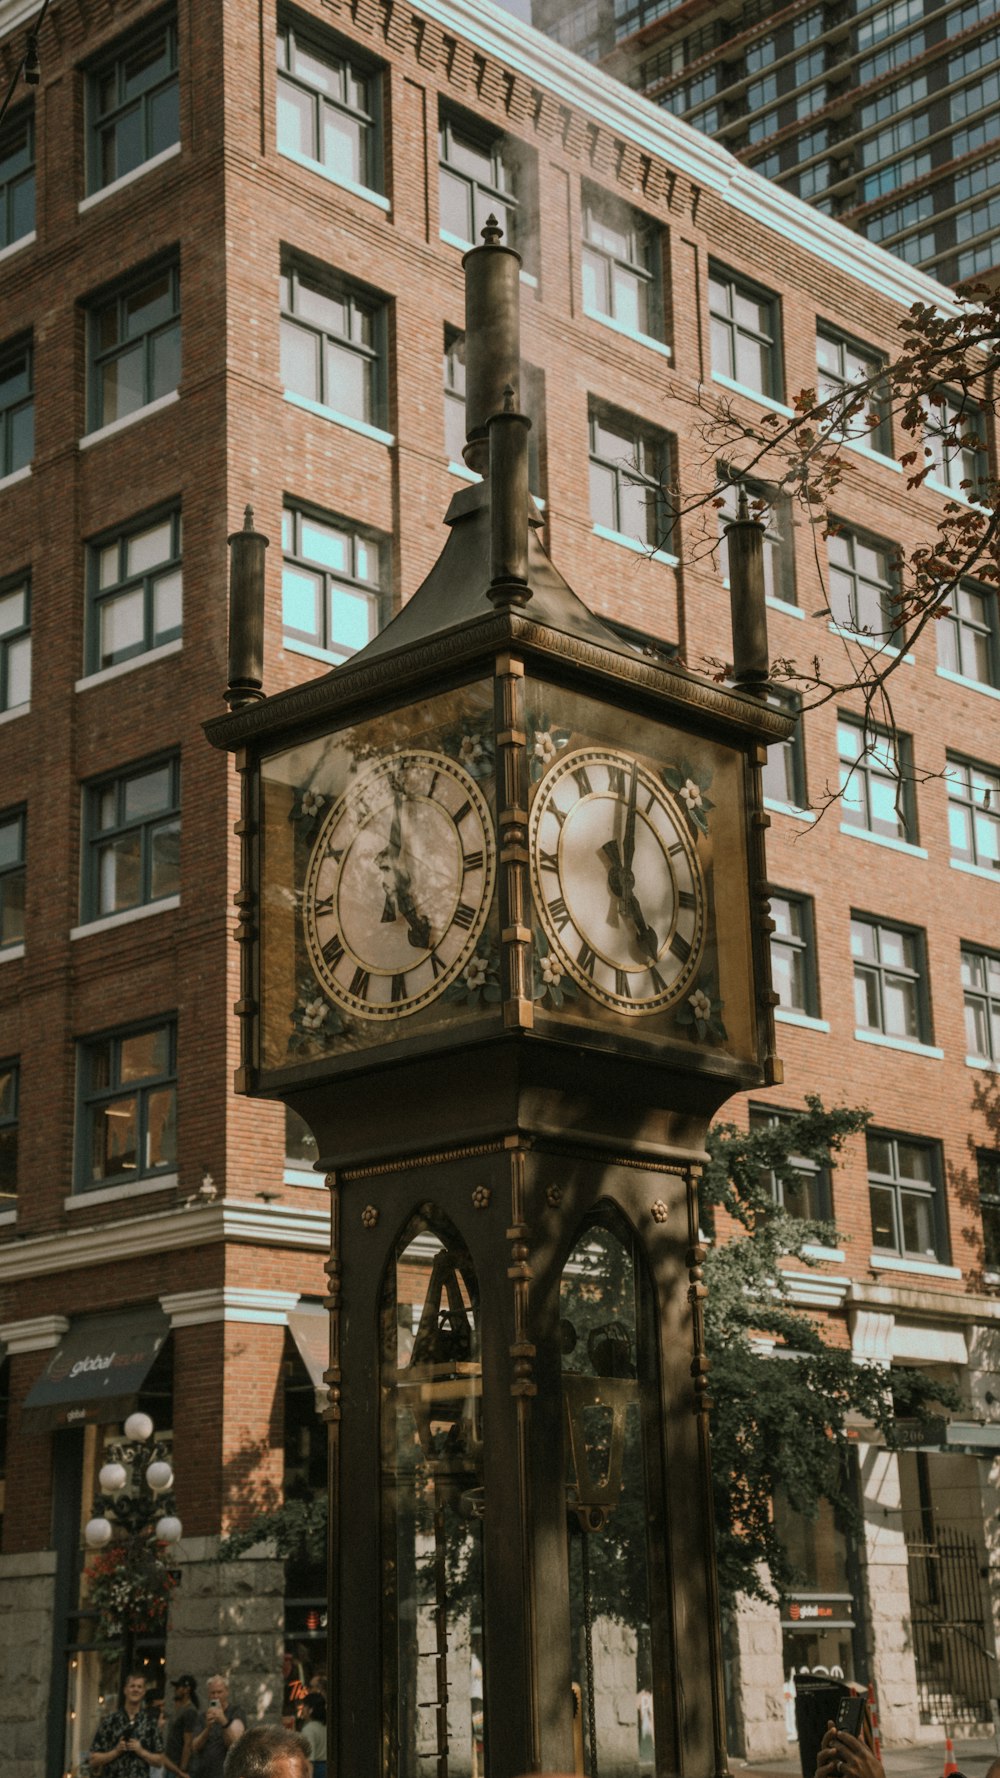 a clock tower in the middle of a city